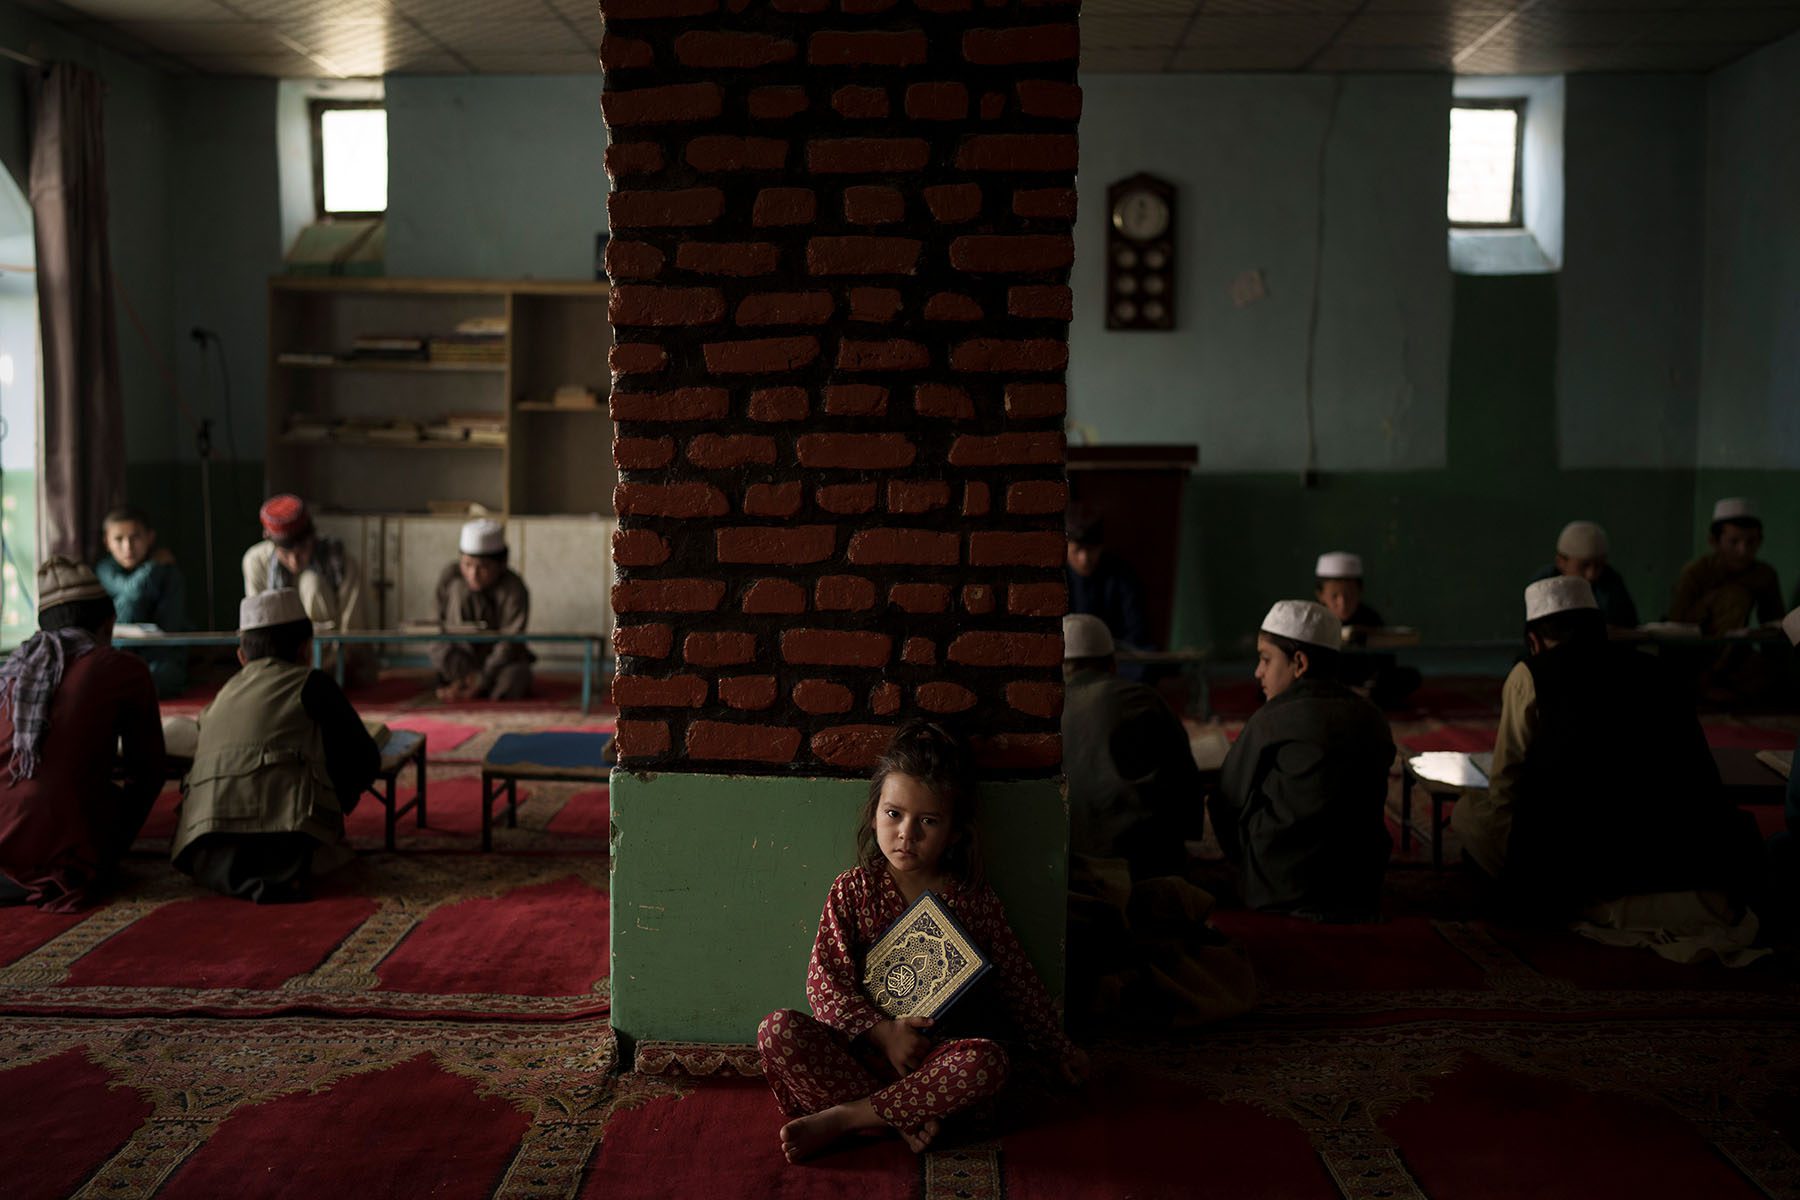 A little girl sits alone and holds a Quran in a classroom.